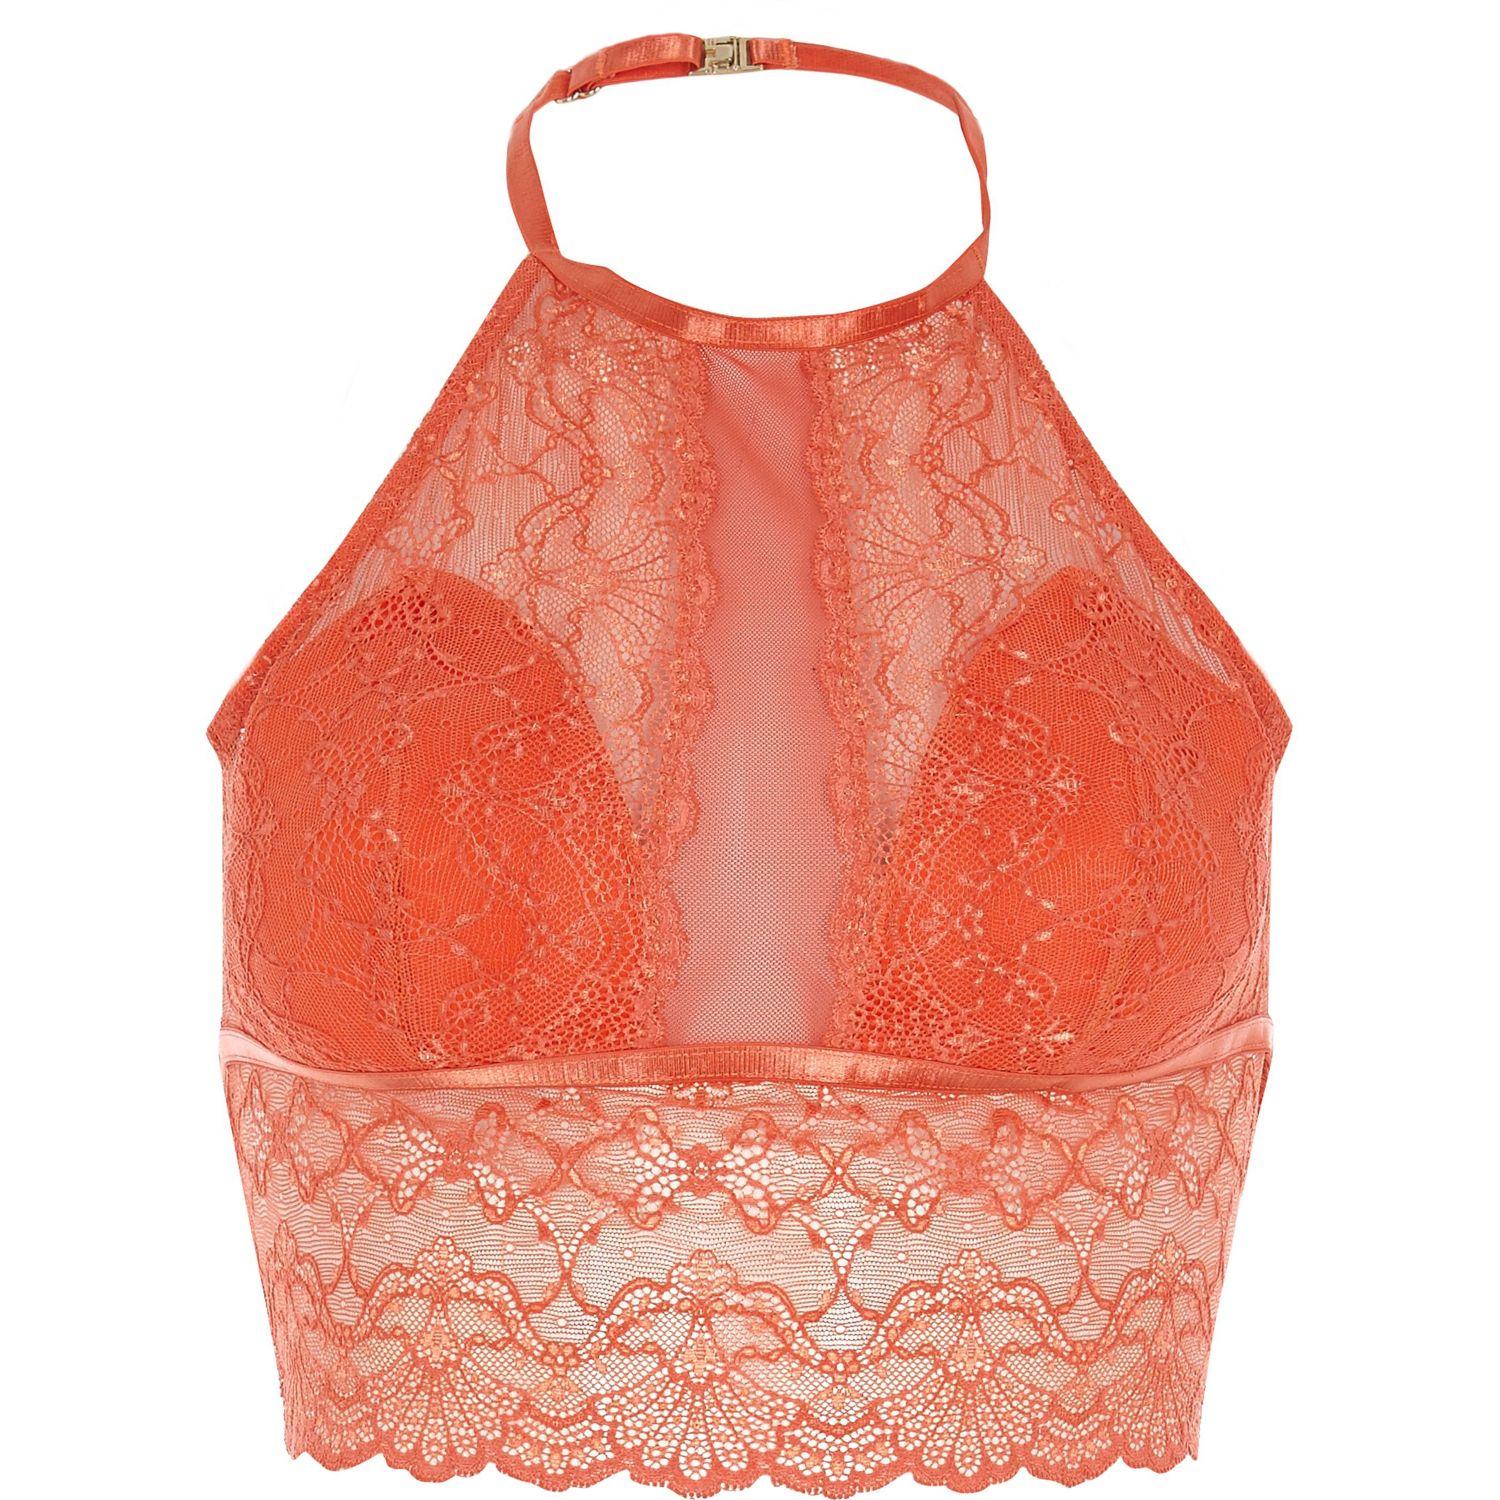 Lyst - River island Red Halterneck Longline Lace Bra in Red